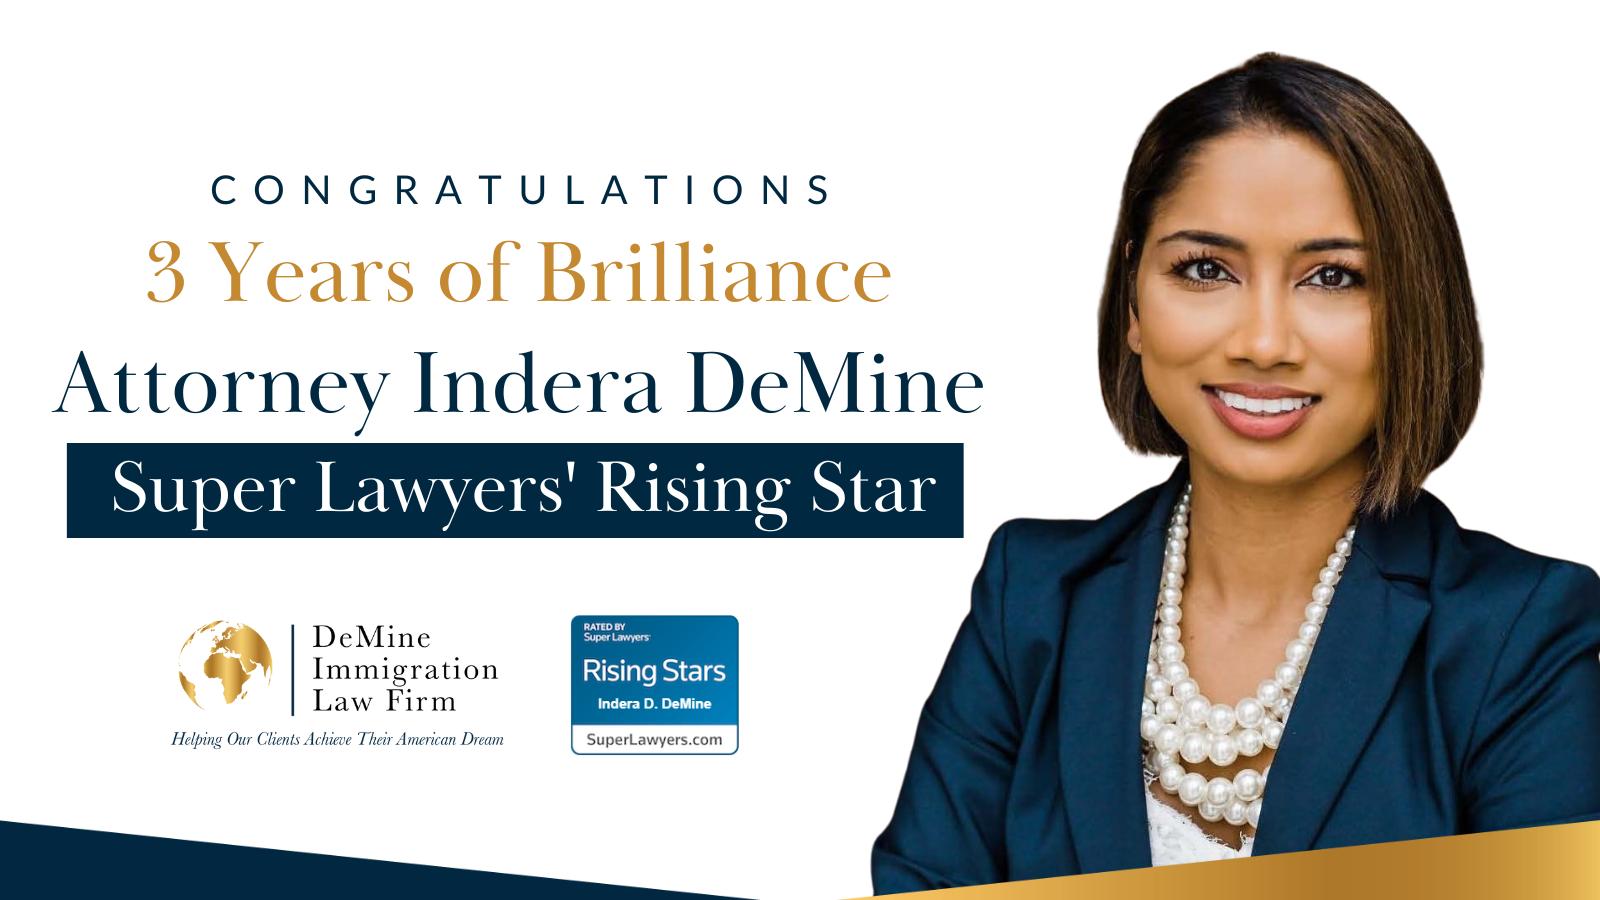 Recognizing Attorney Indera DeMine's Consecutive 3-Year Achievement as a Super Lawyers Rising Star